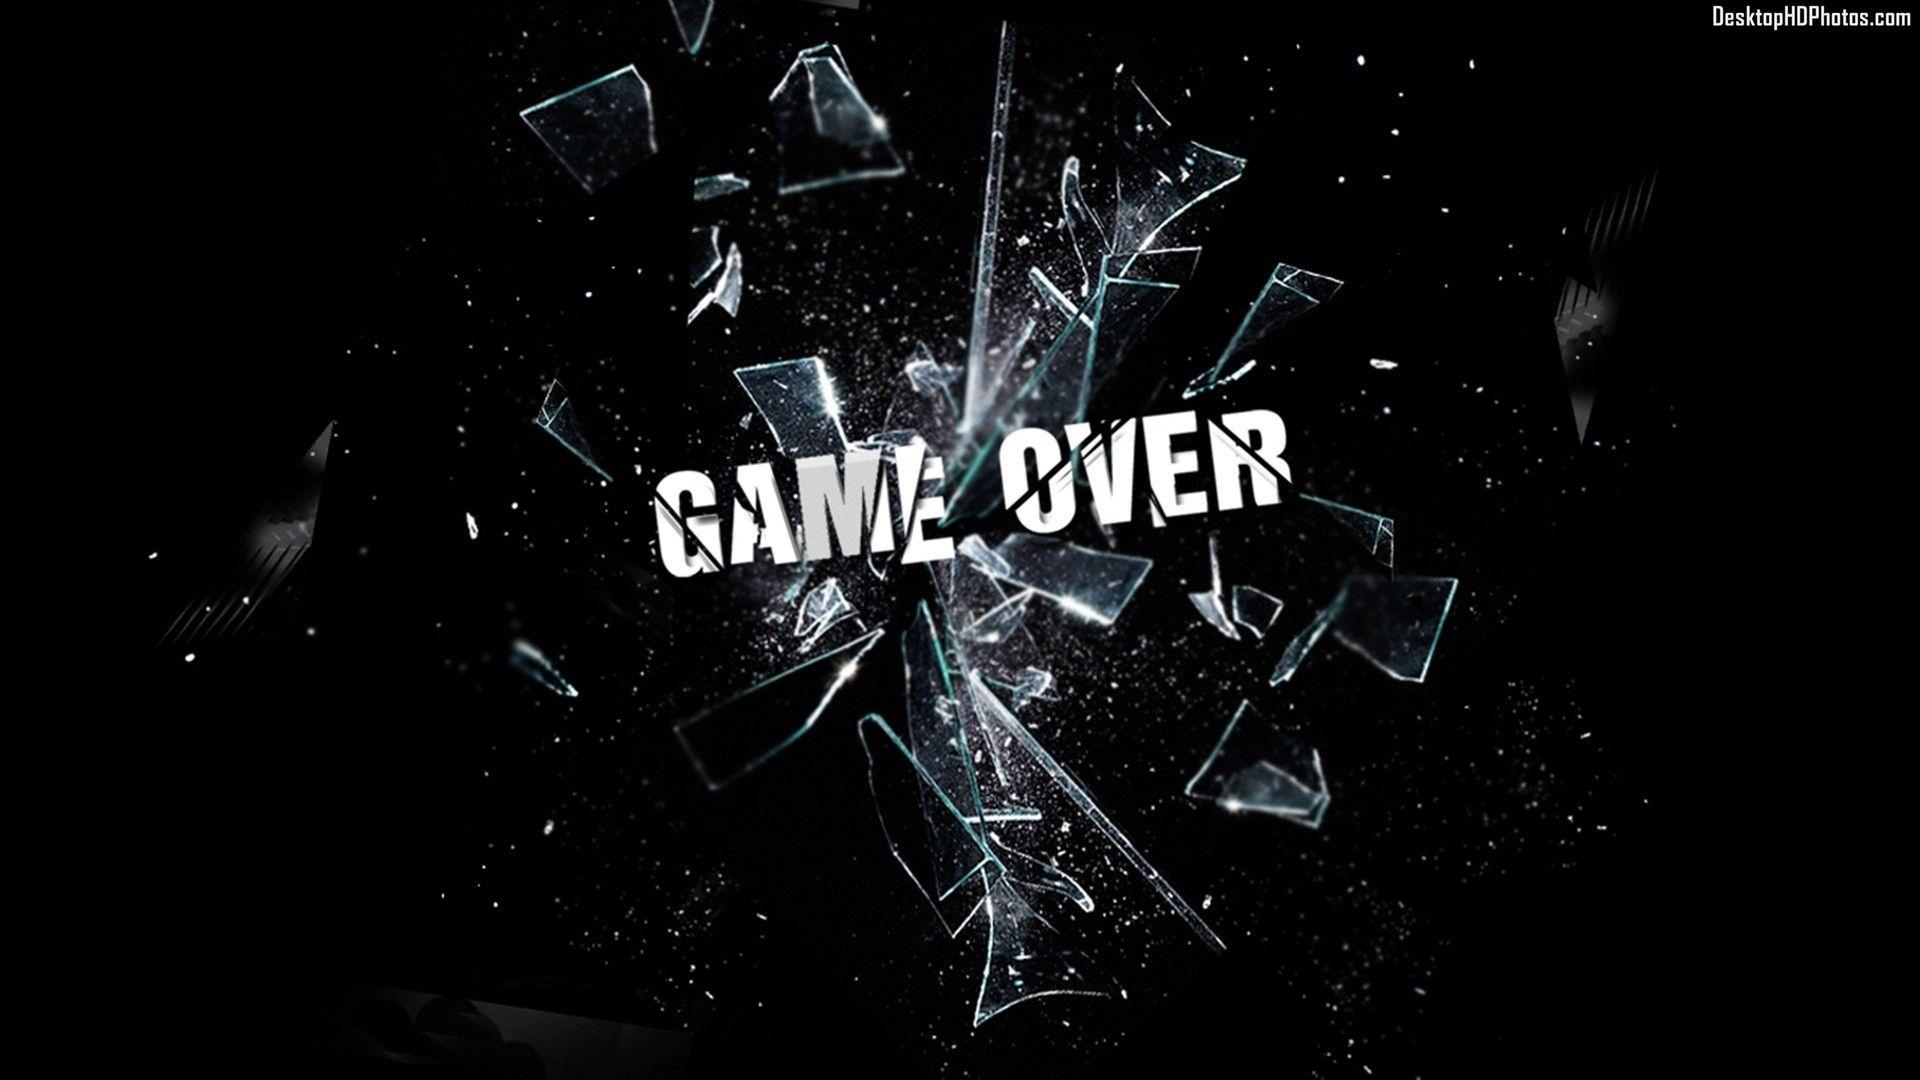 Cool Game Over Wallpapers Top Free Cool Game Over Backgrounds Wallpaperaccess